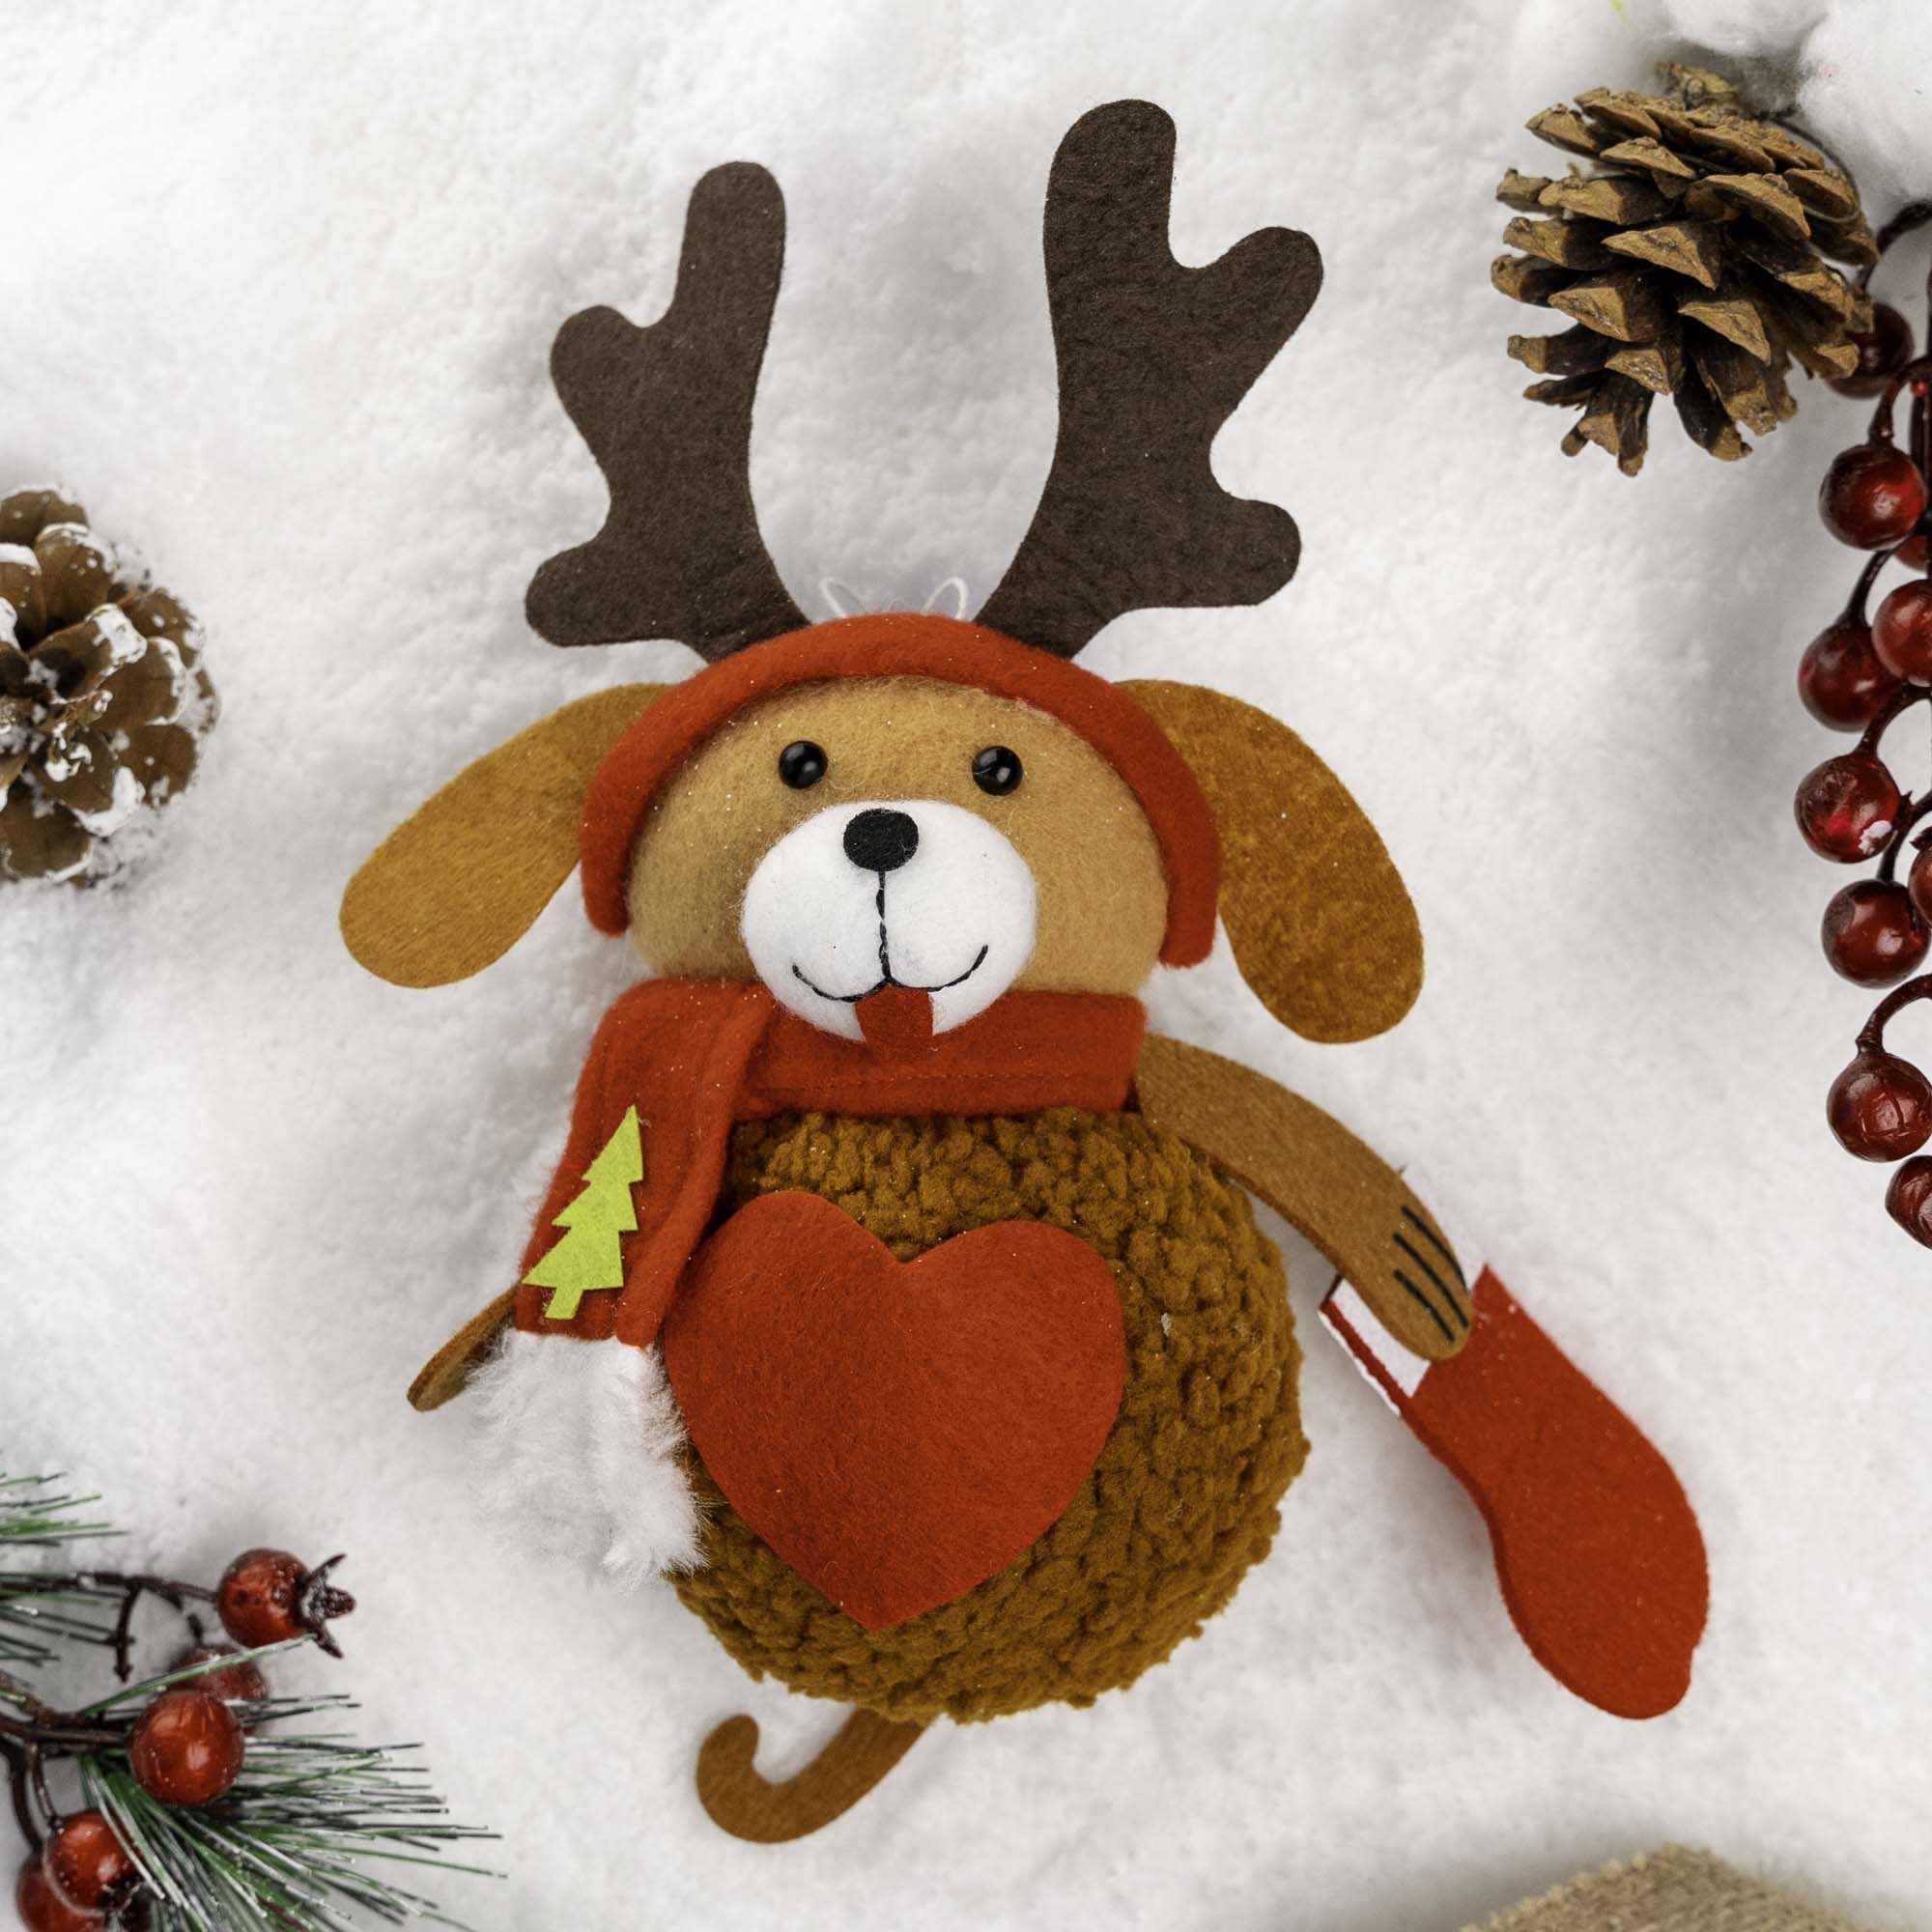 Image of Reindeer Dog the Rescue Pup Christmas Ornament - Sneak Peak Special Offer 47% OFF!